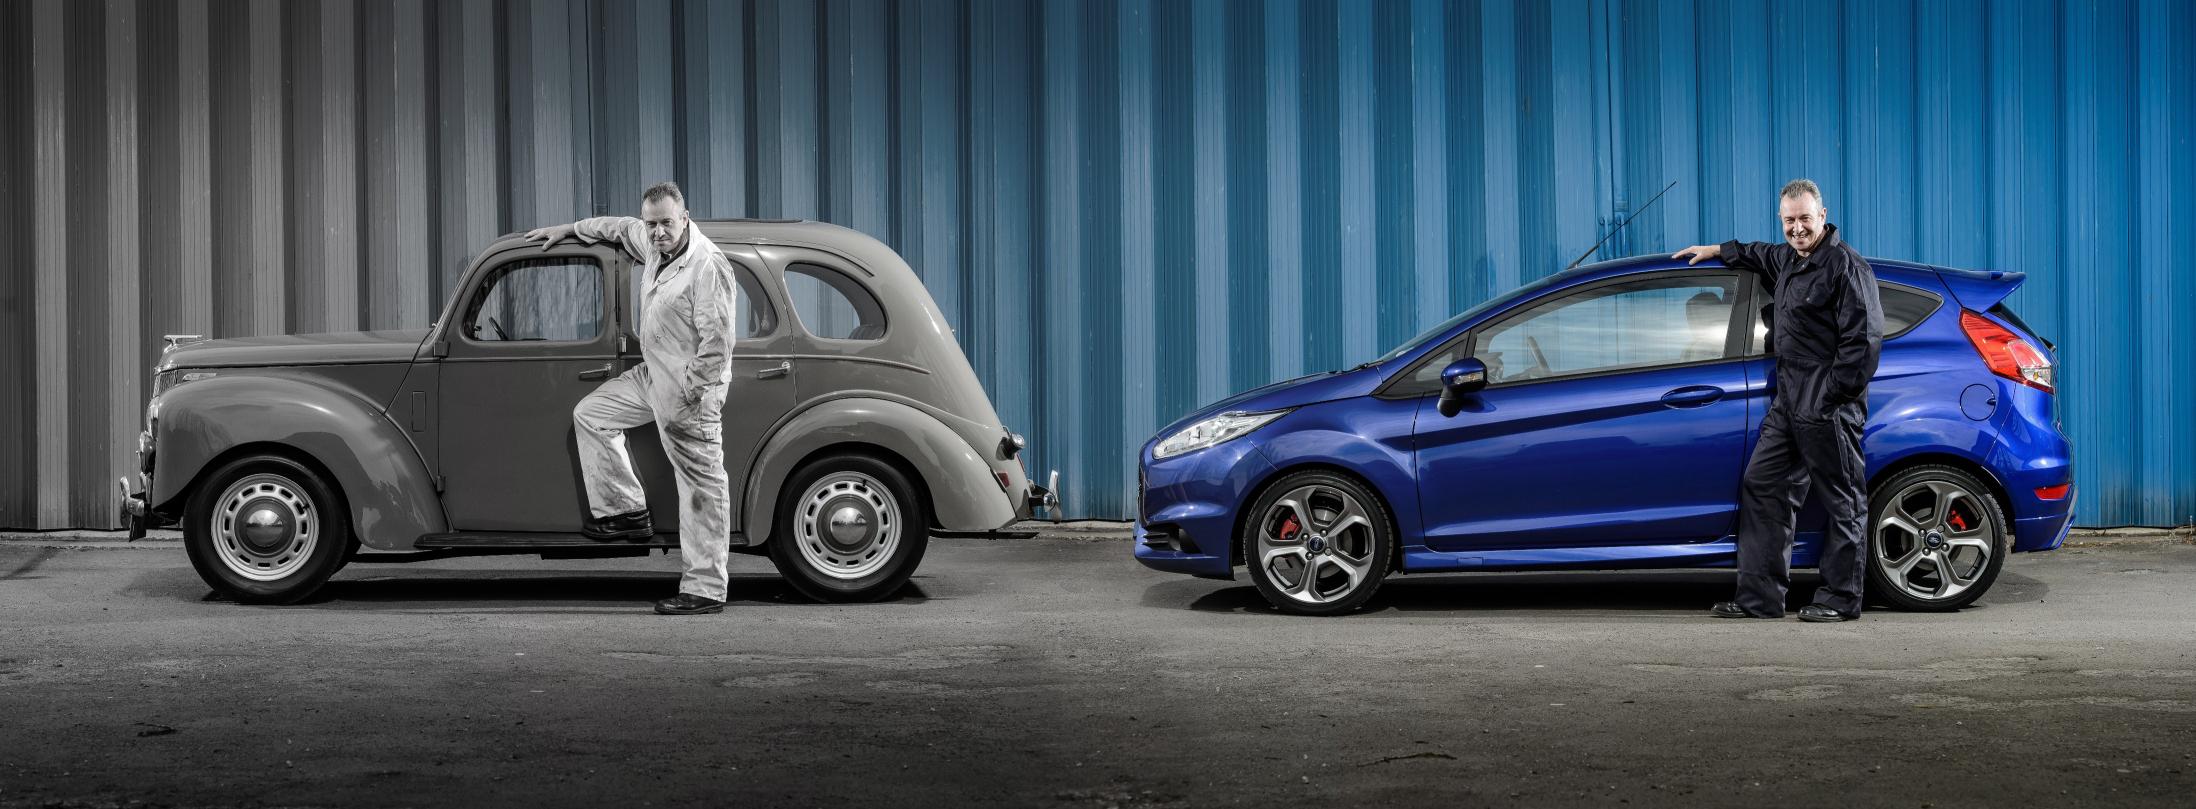 Side-by-side, Ford Prefect, born in the baby boomer period, and Ford Fiesta ST, representing the auto boomers